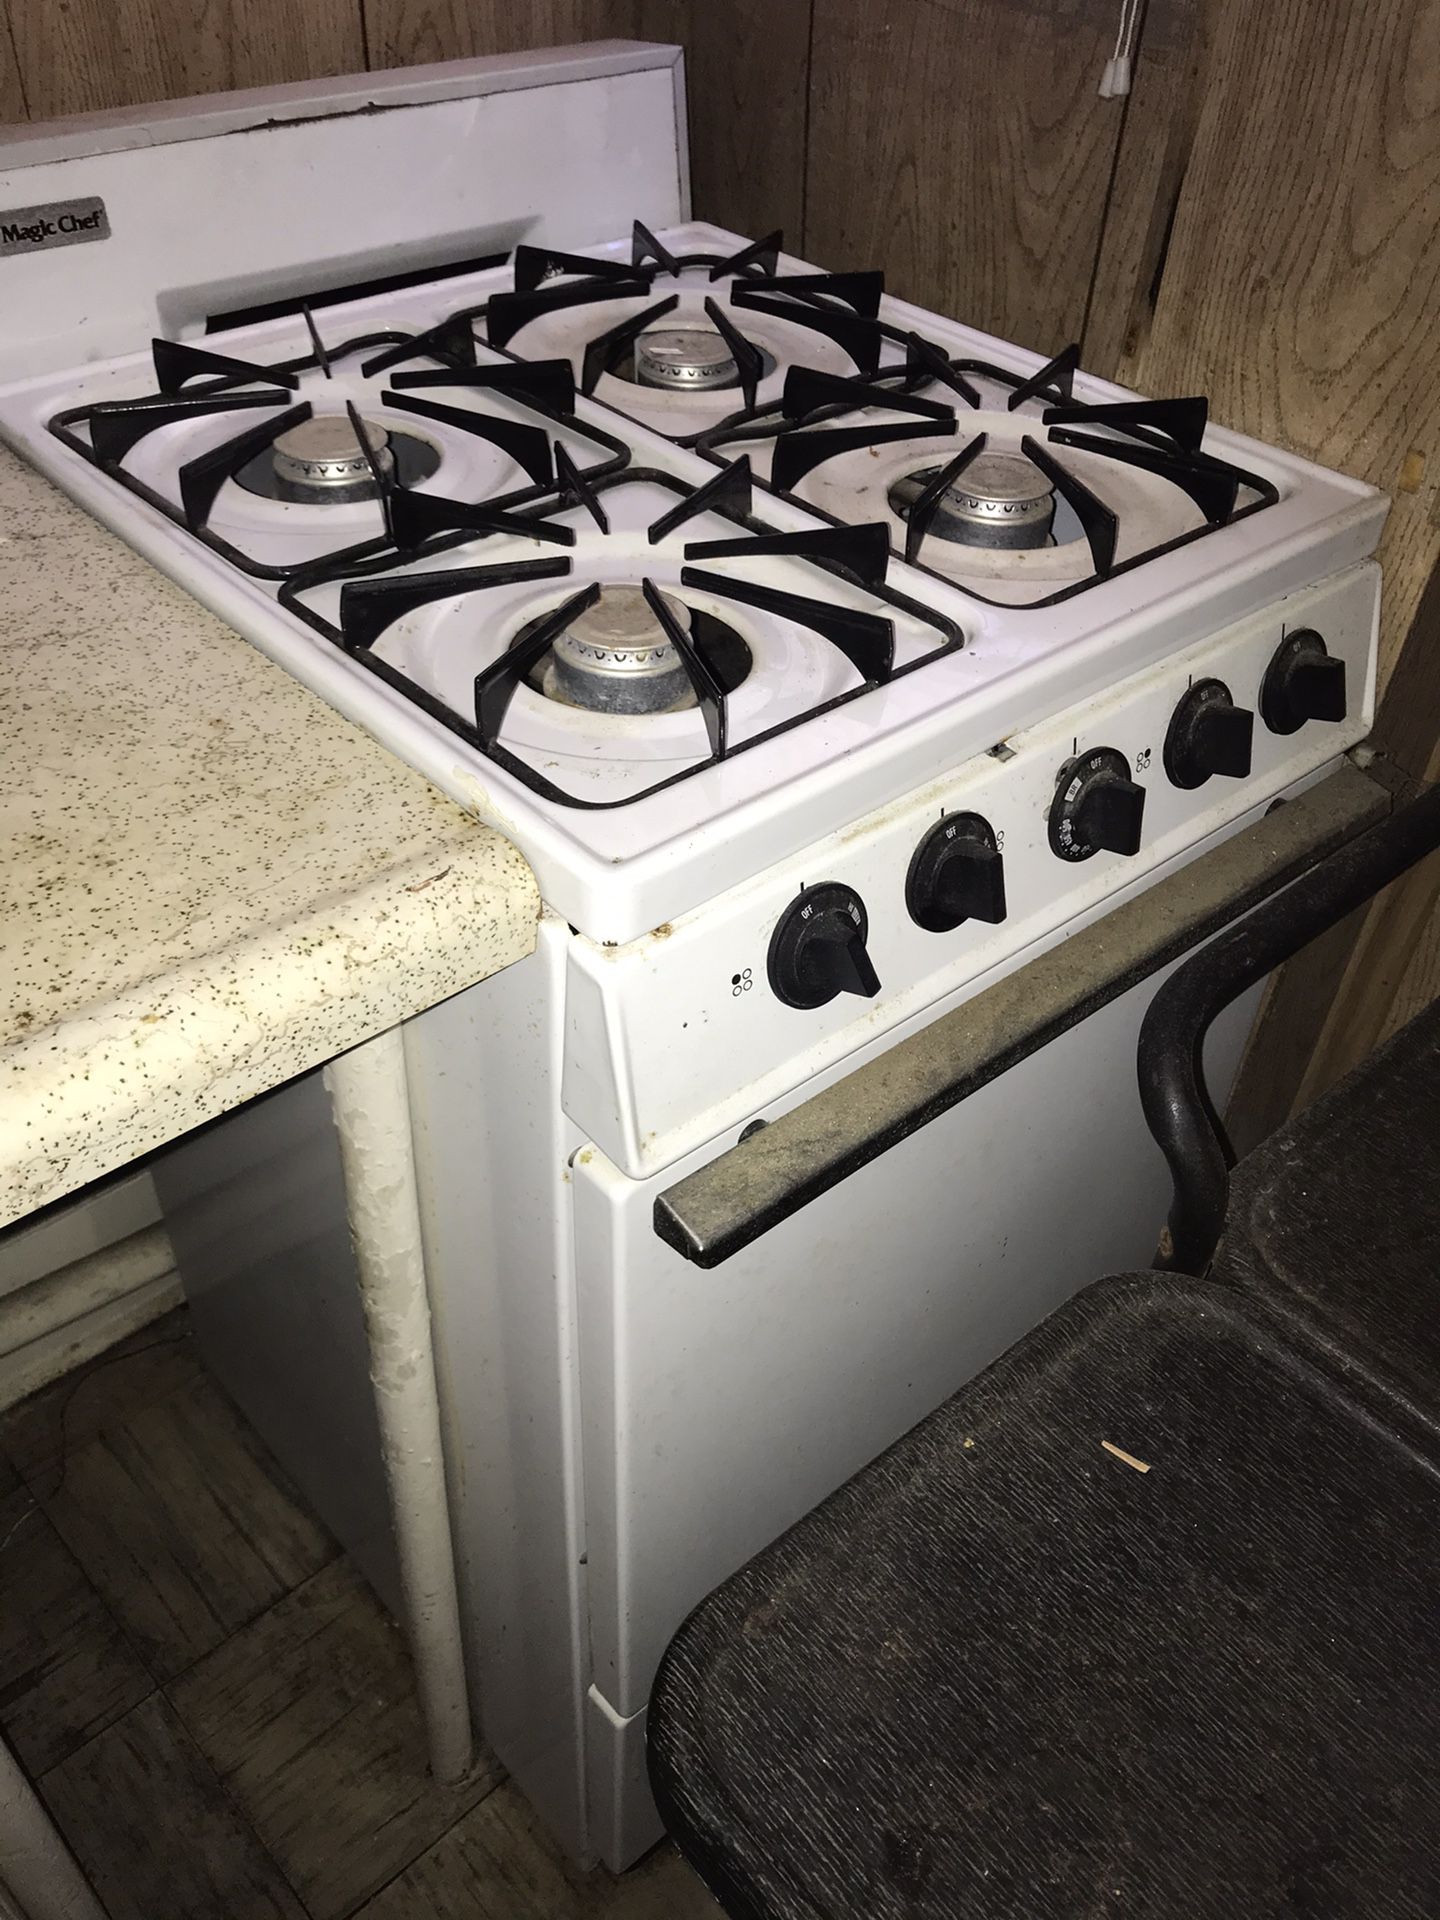 Apartment gas stove oven